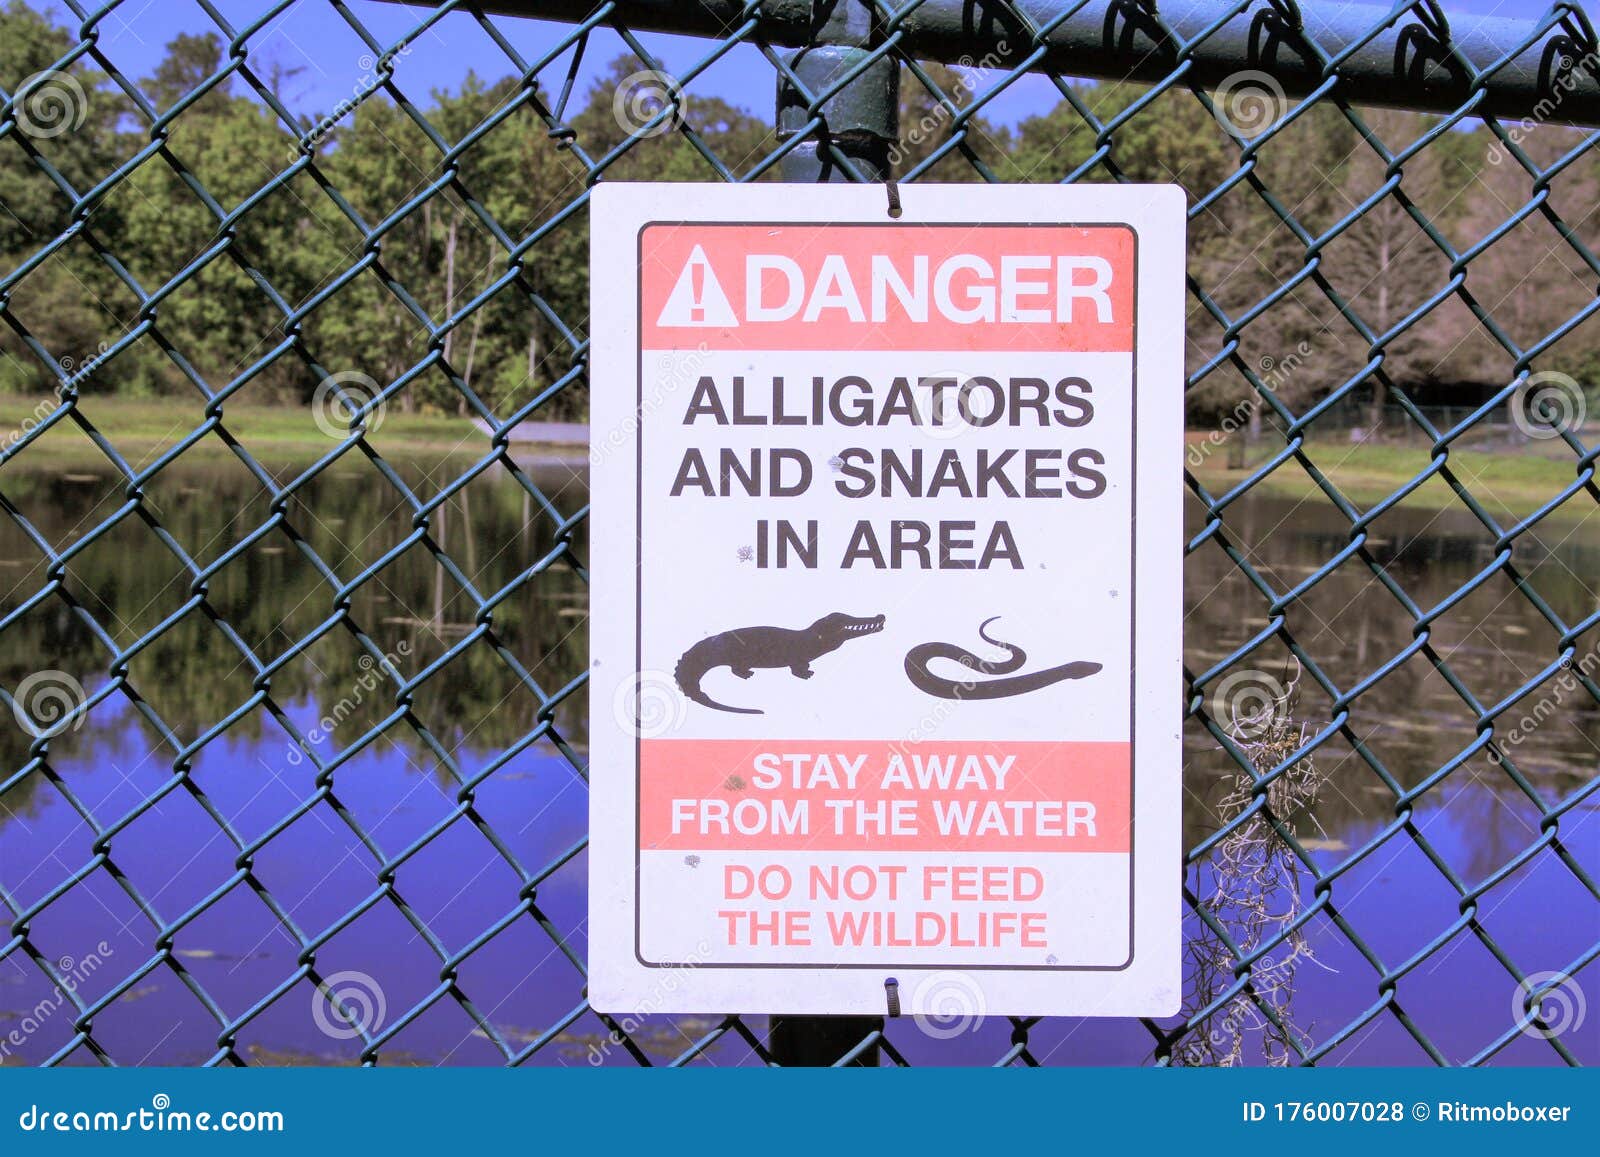 danger sign alligators and snakes posted by a lake at a park in florida